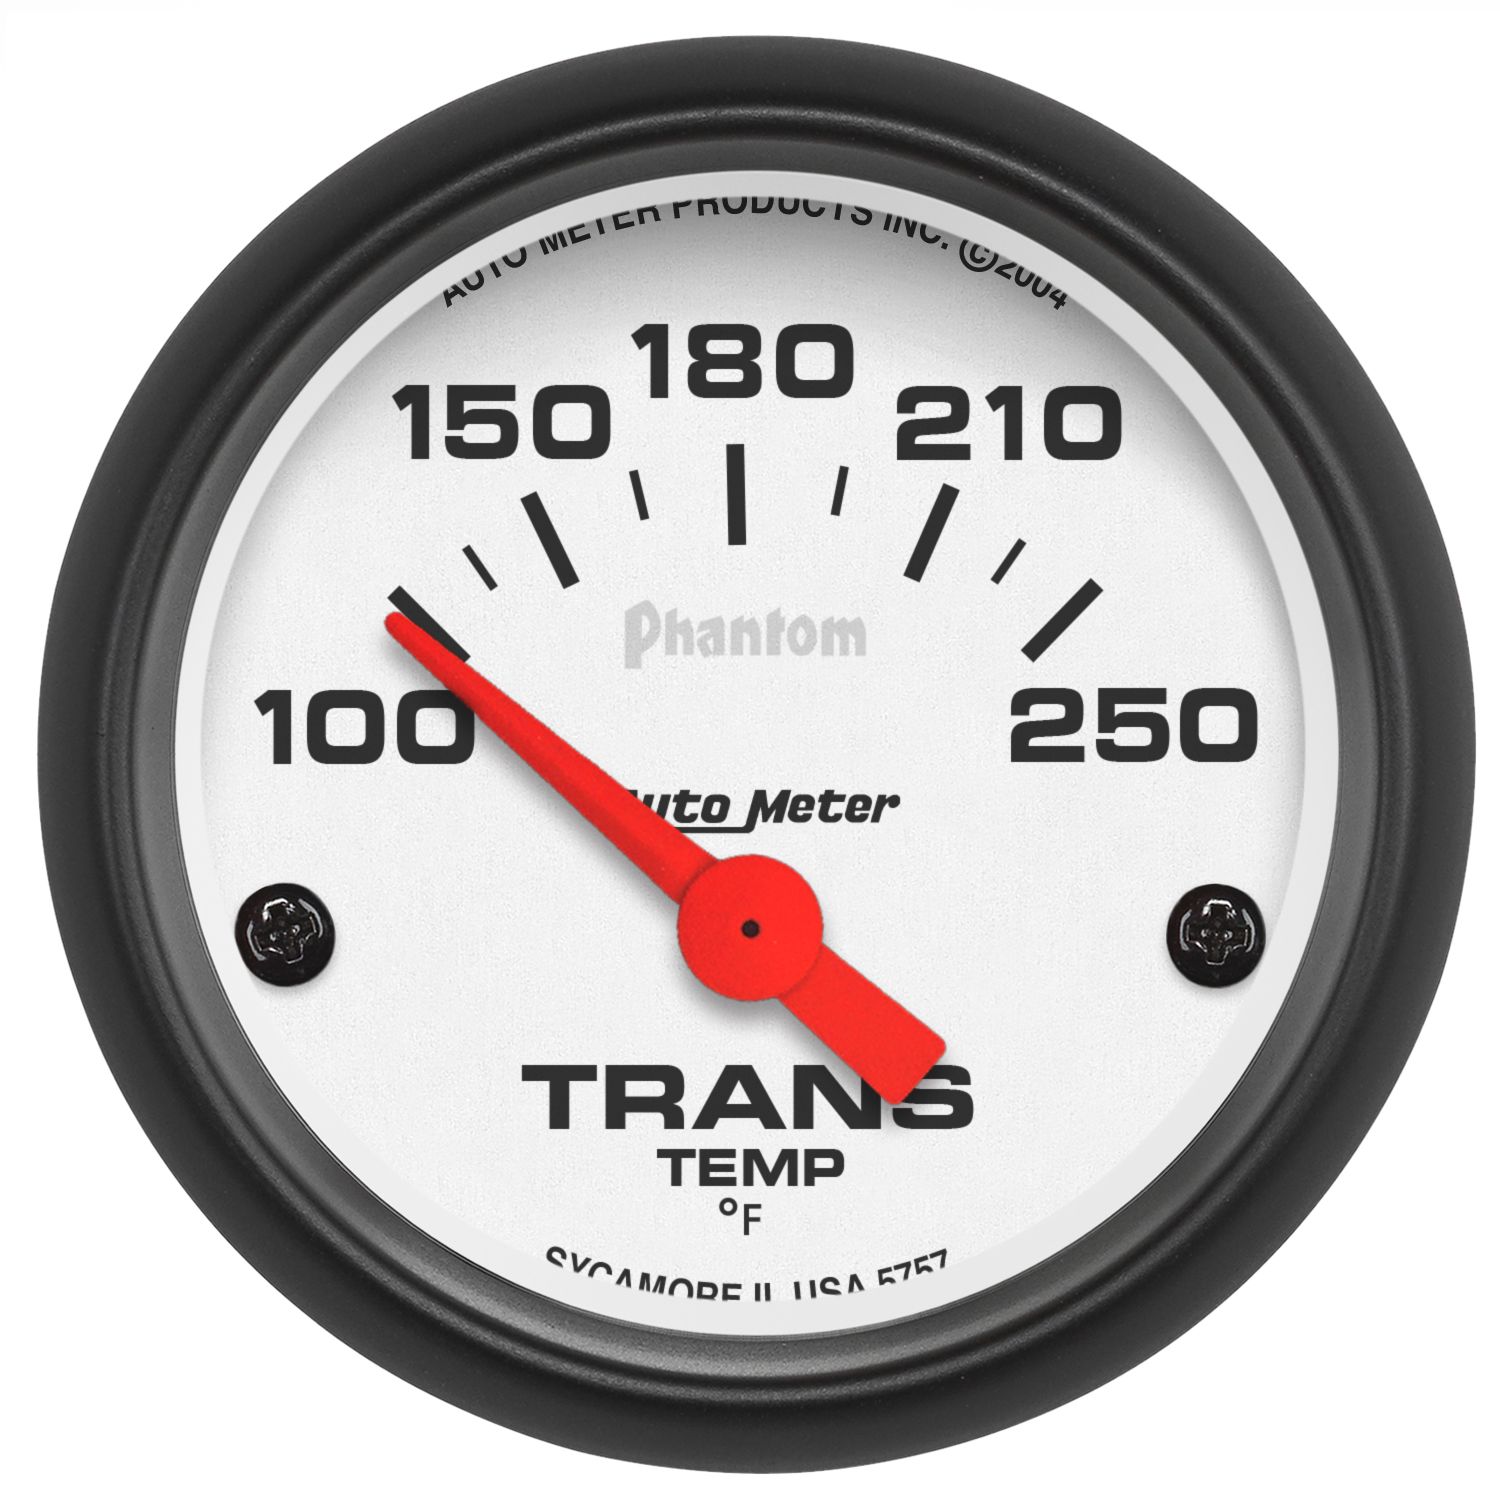 Transmission Temperature Gauge: Monitor Your Gearbox!